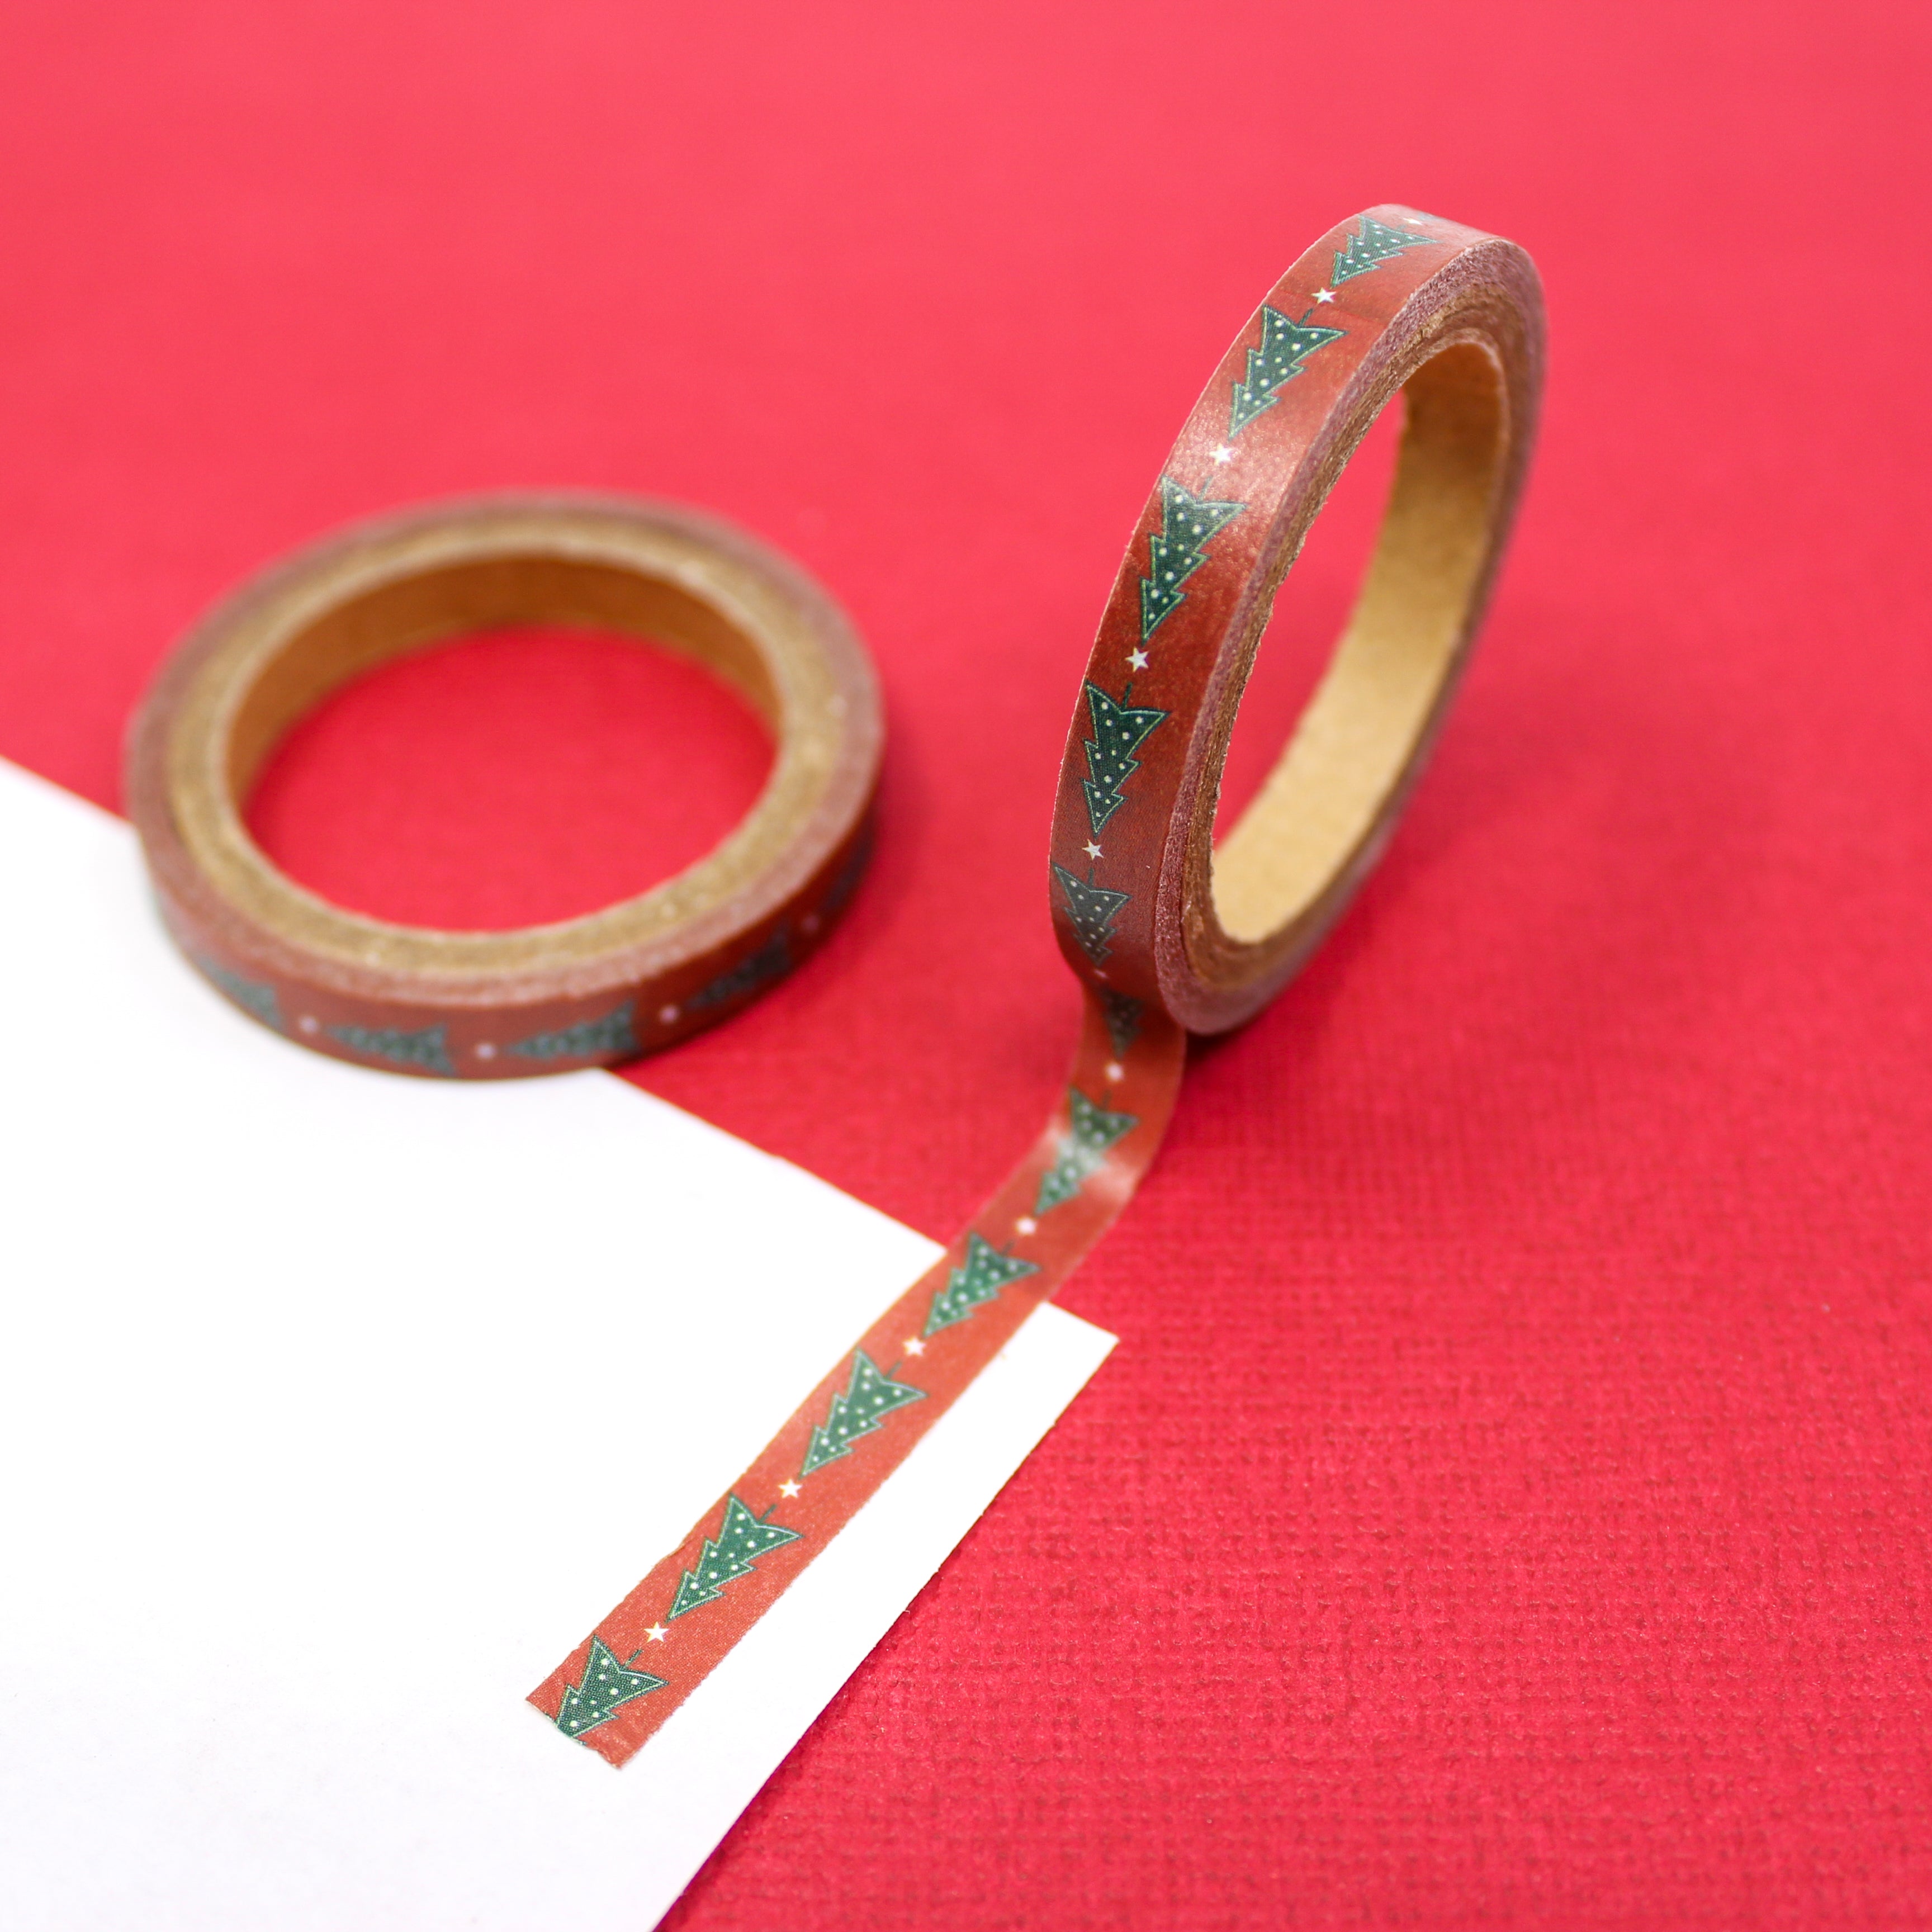 Celebrate the festive season with our red Christmas tree washi tape, featuring charming Christmas tree designs in a vibrant red hue, perfect for adding a touch of holiday spirit to your crafts. This tape is sold at BBB Supplies Craft Shop.